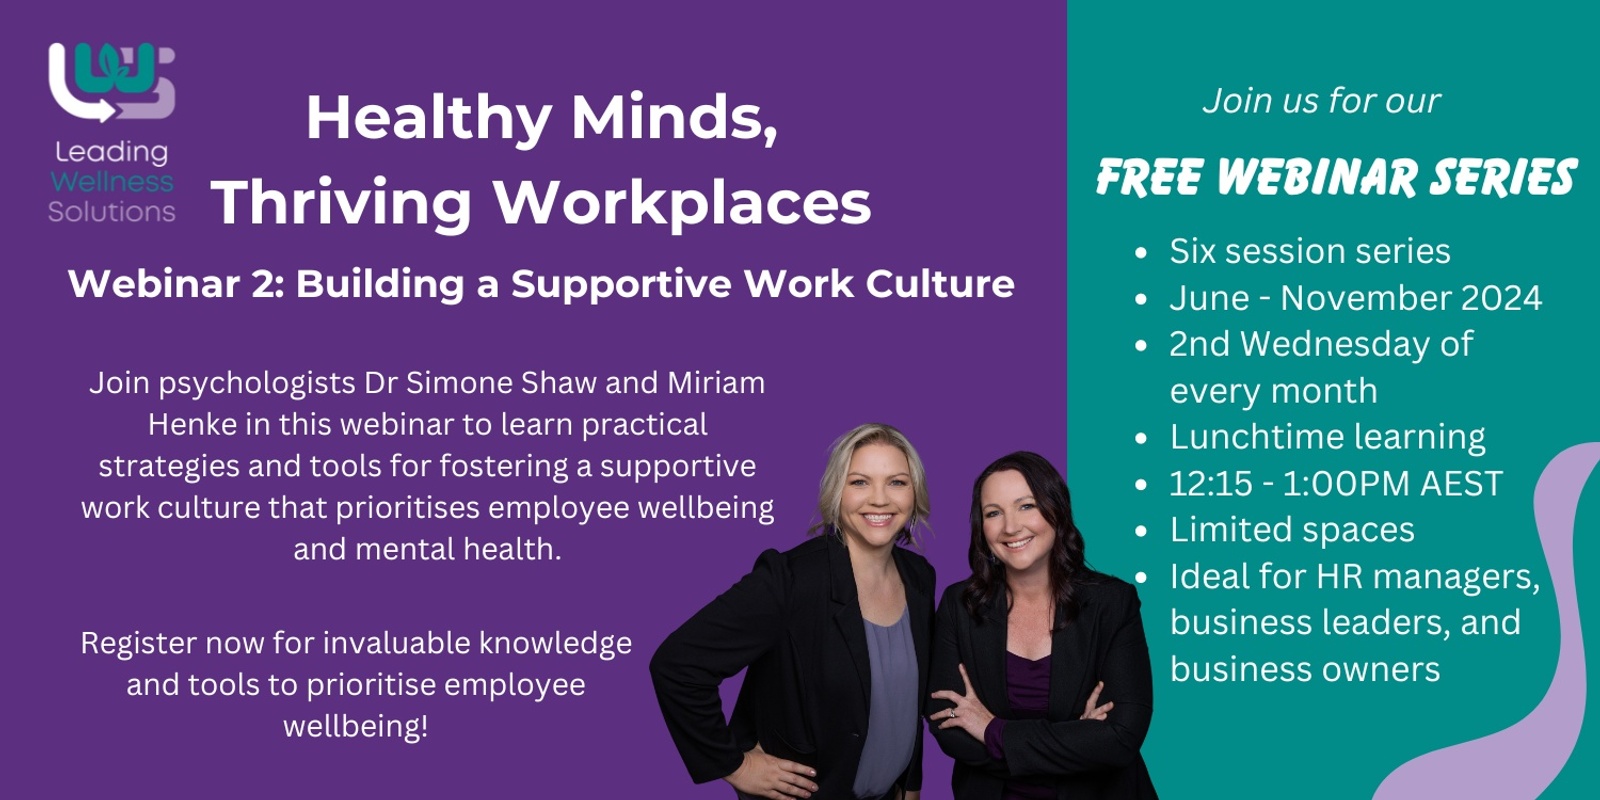 Banner image for Healthy Minds, Thriving Workplaces: Webinar 2 "Building a Supportive Work Culture"